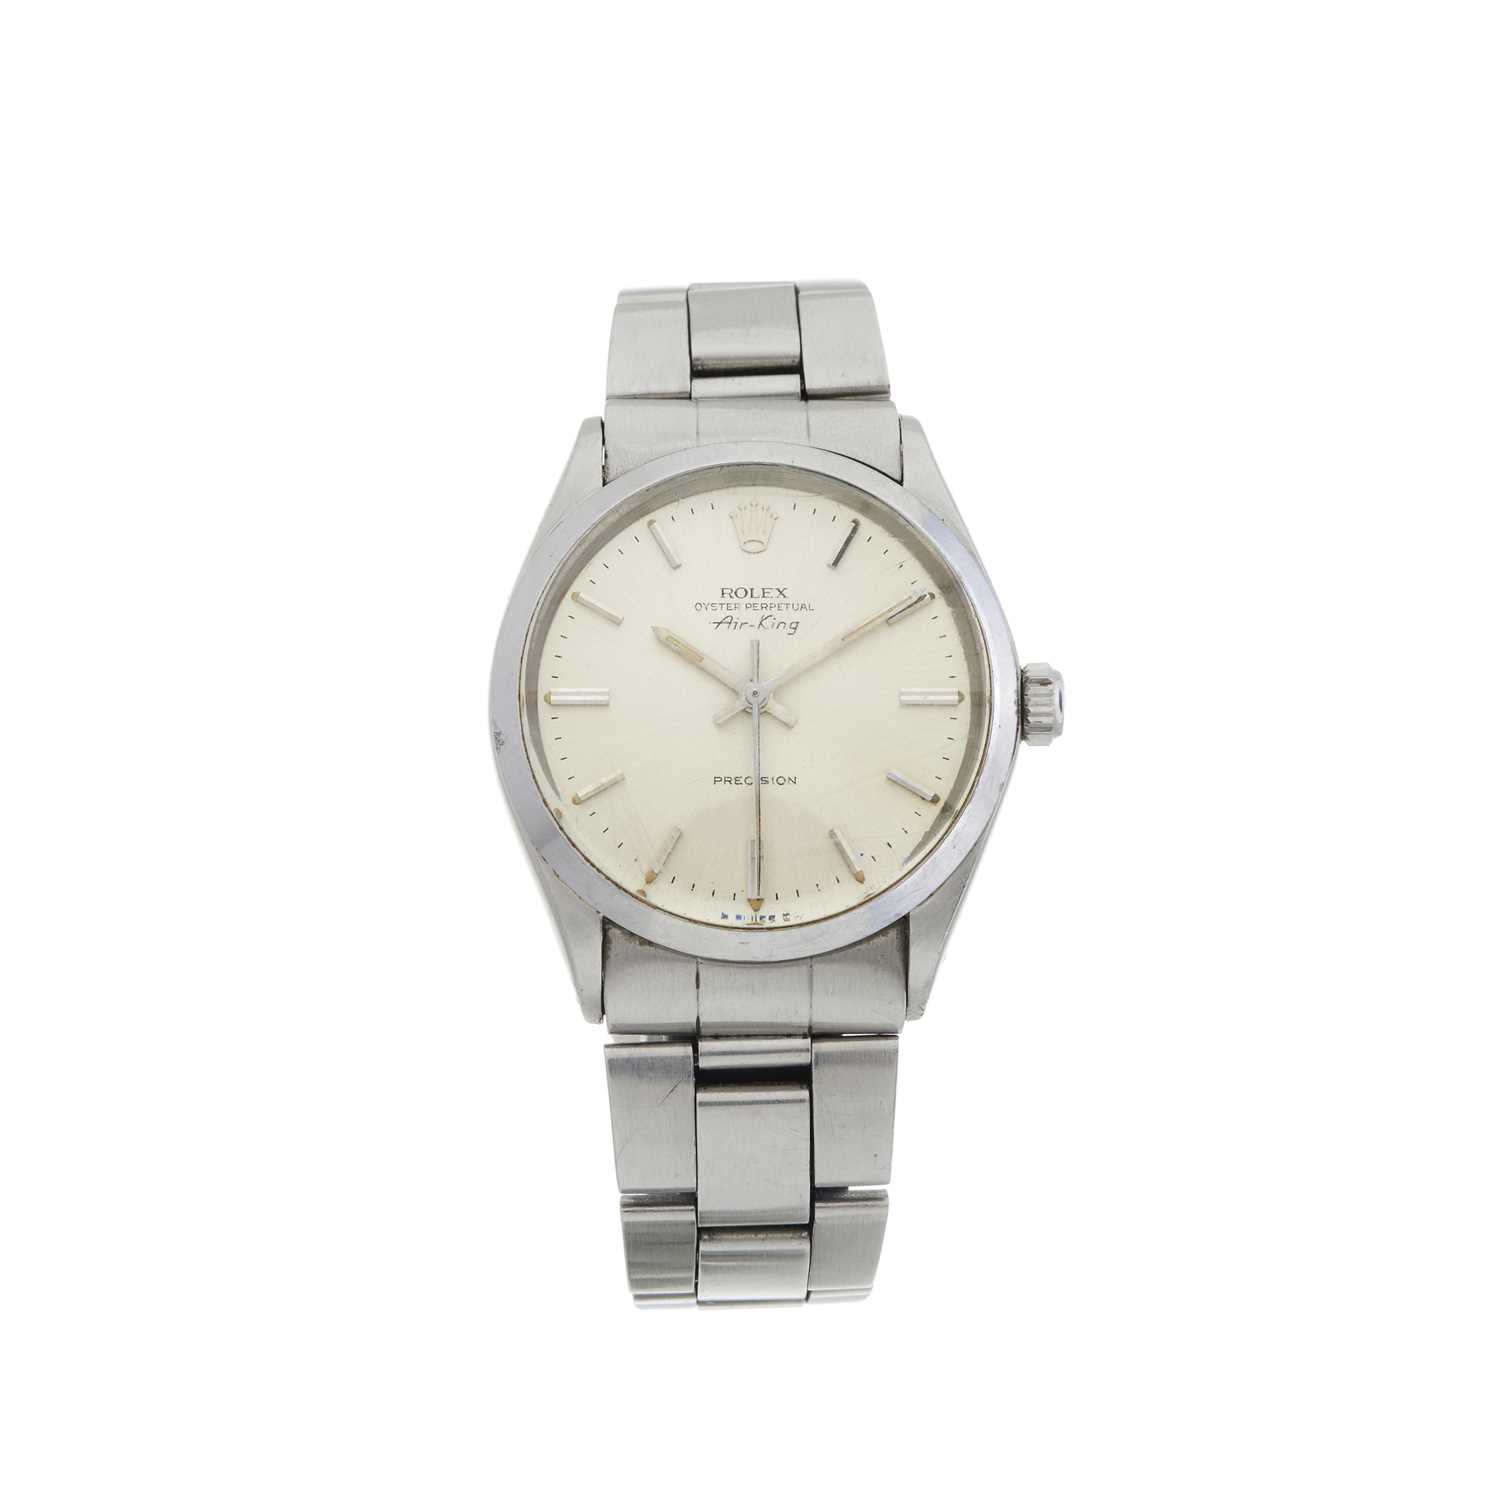 Rolex, a stainless steel Oyster Perpetual Air-King Precision bracelet watch